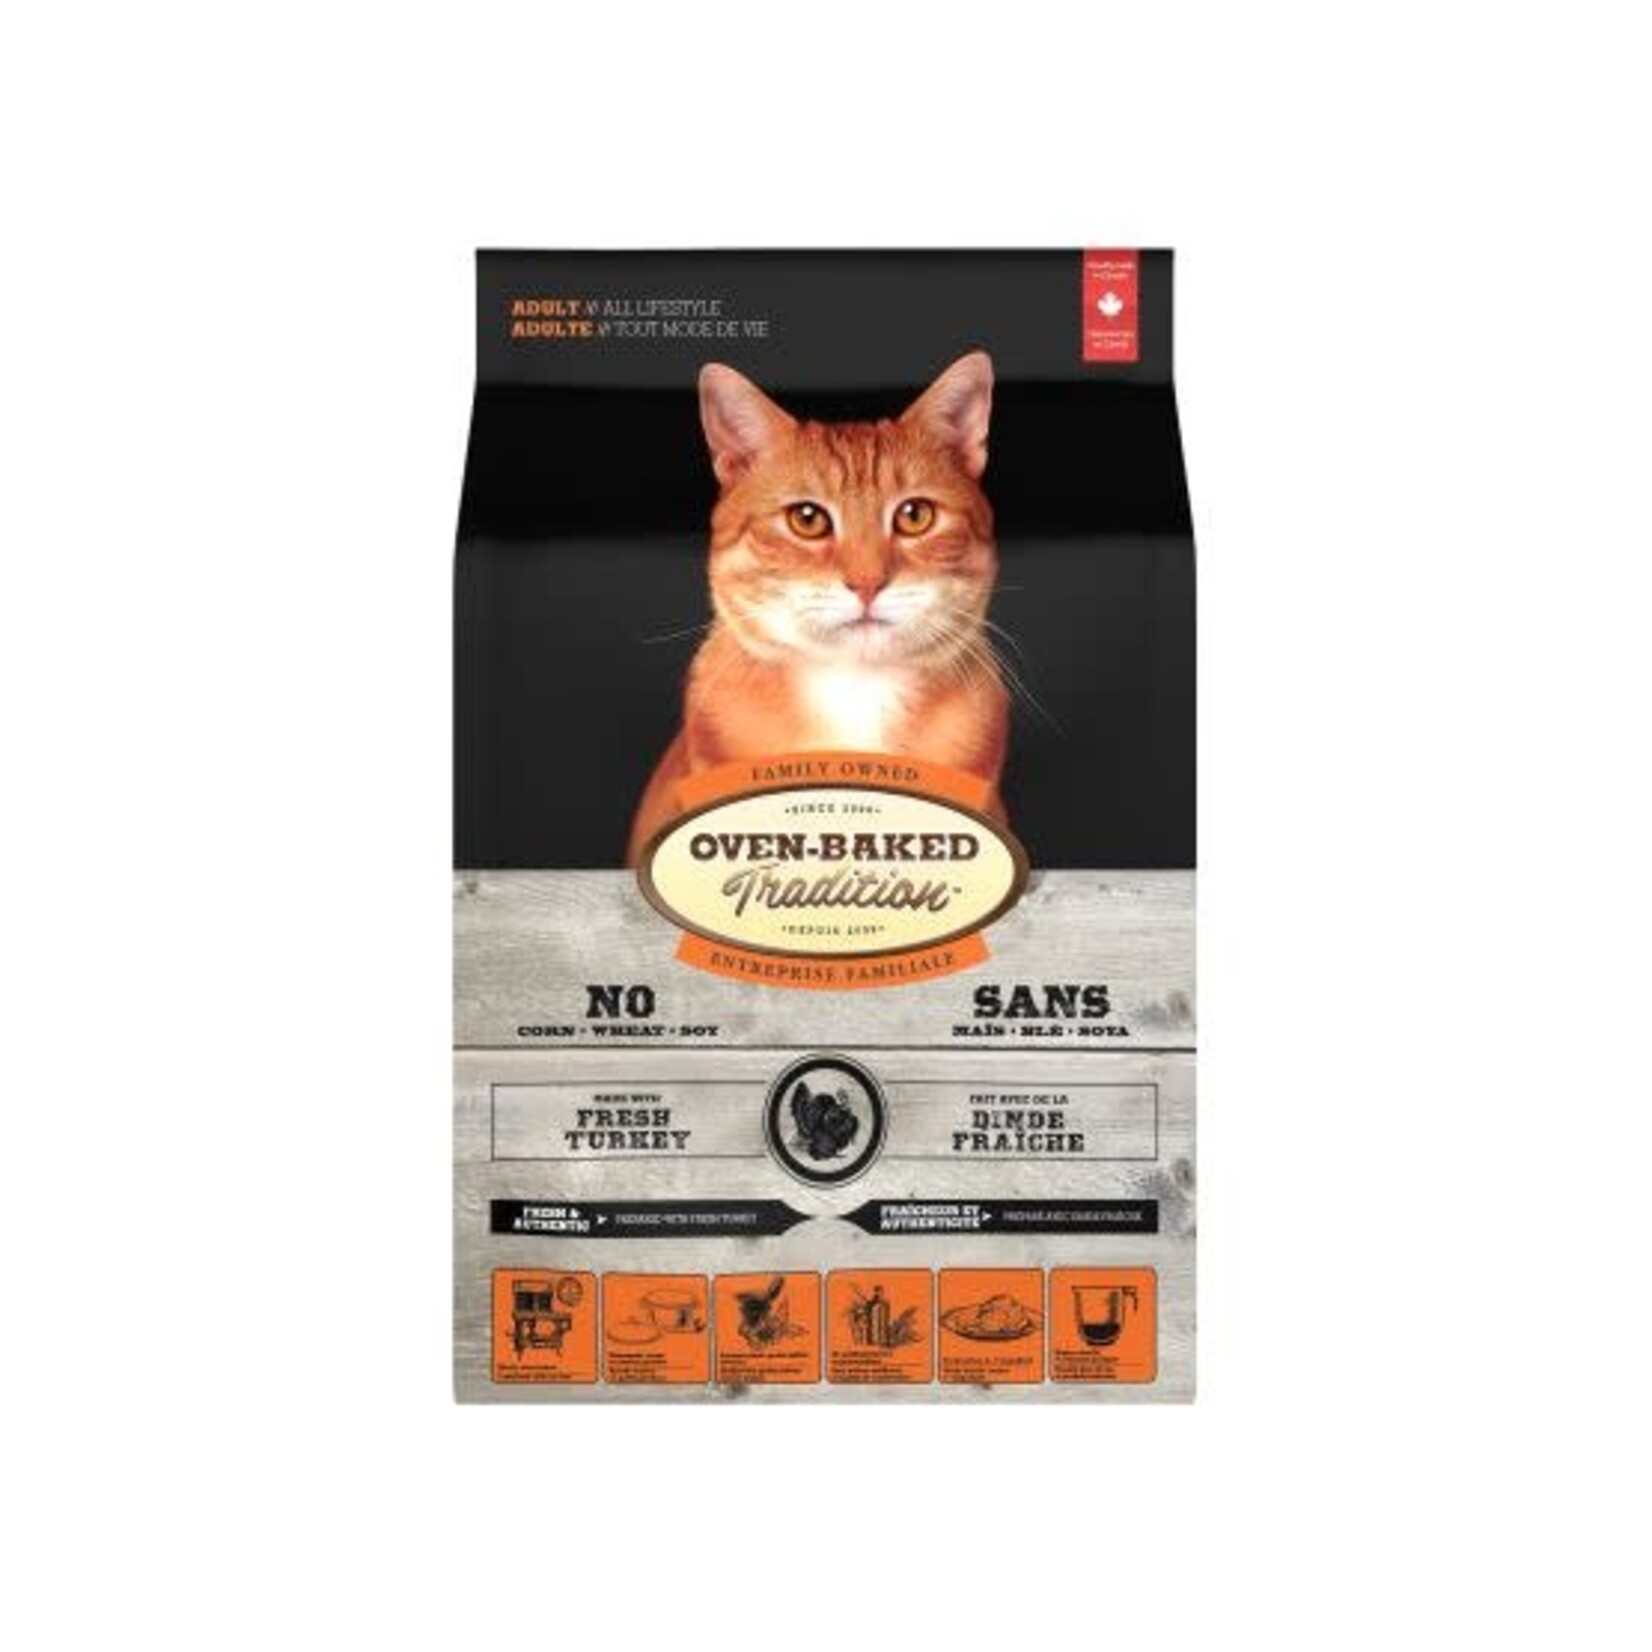 Oven-Baked Tradition Obt Nourriture Sèche Pour Chat - Dinde 2,5 Lbs